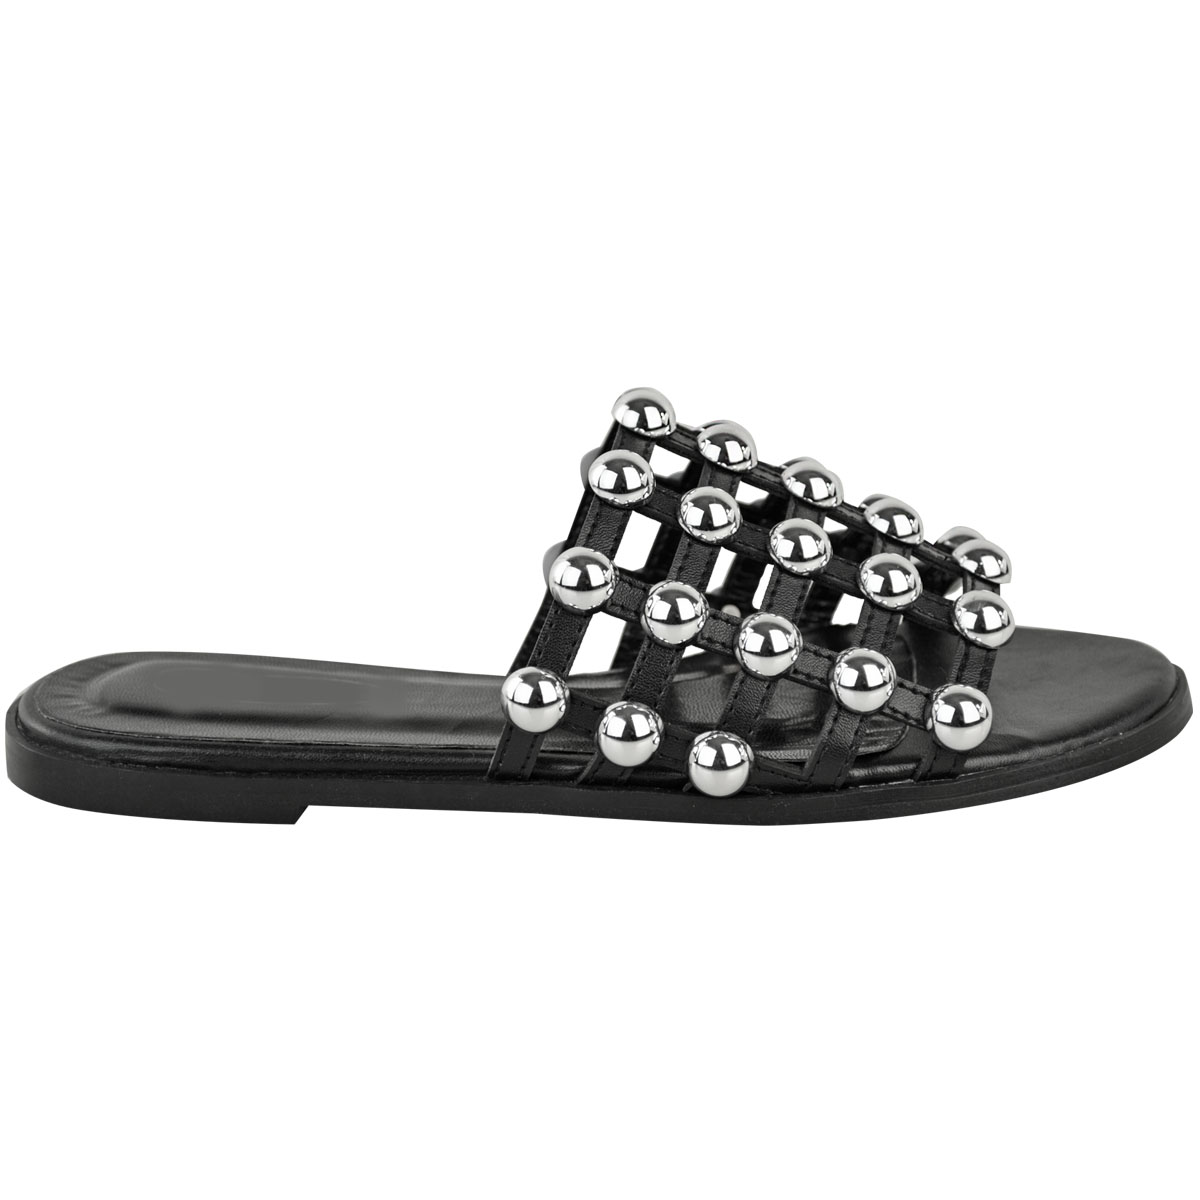 studded sliders outlet store 70265 62c82